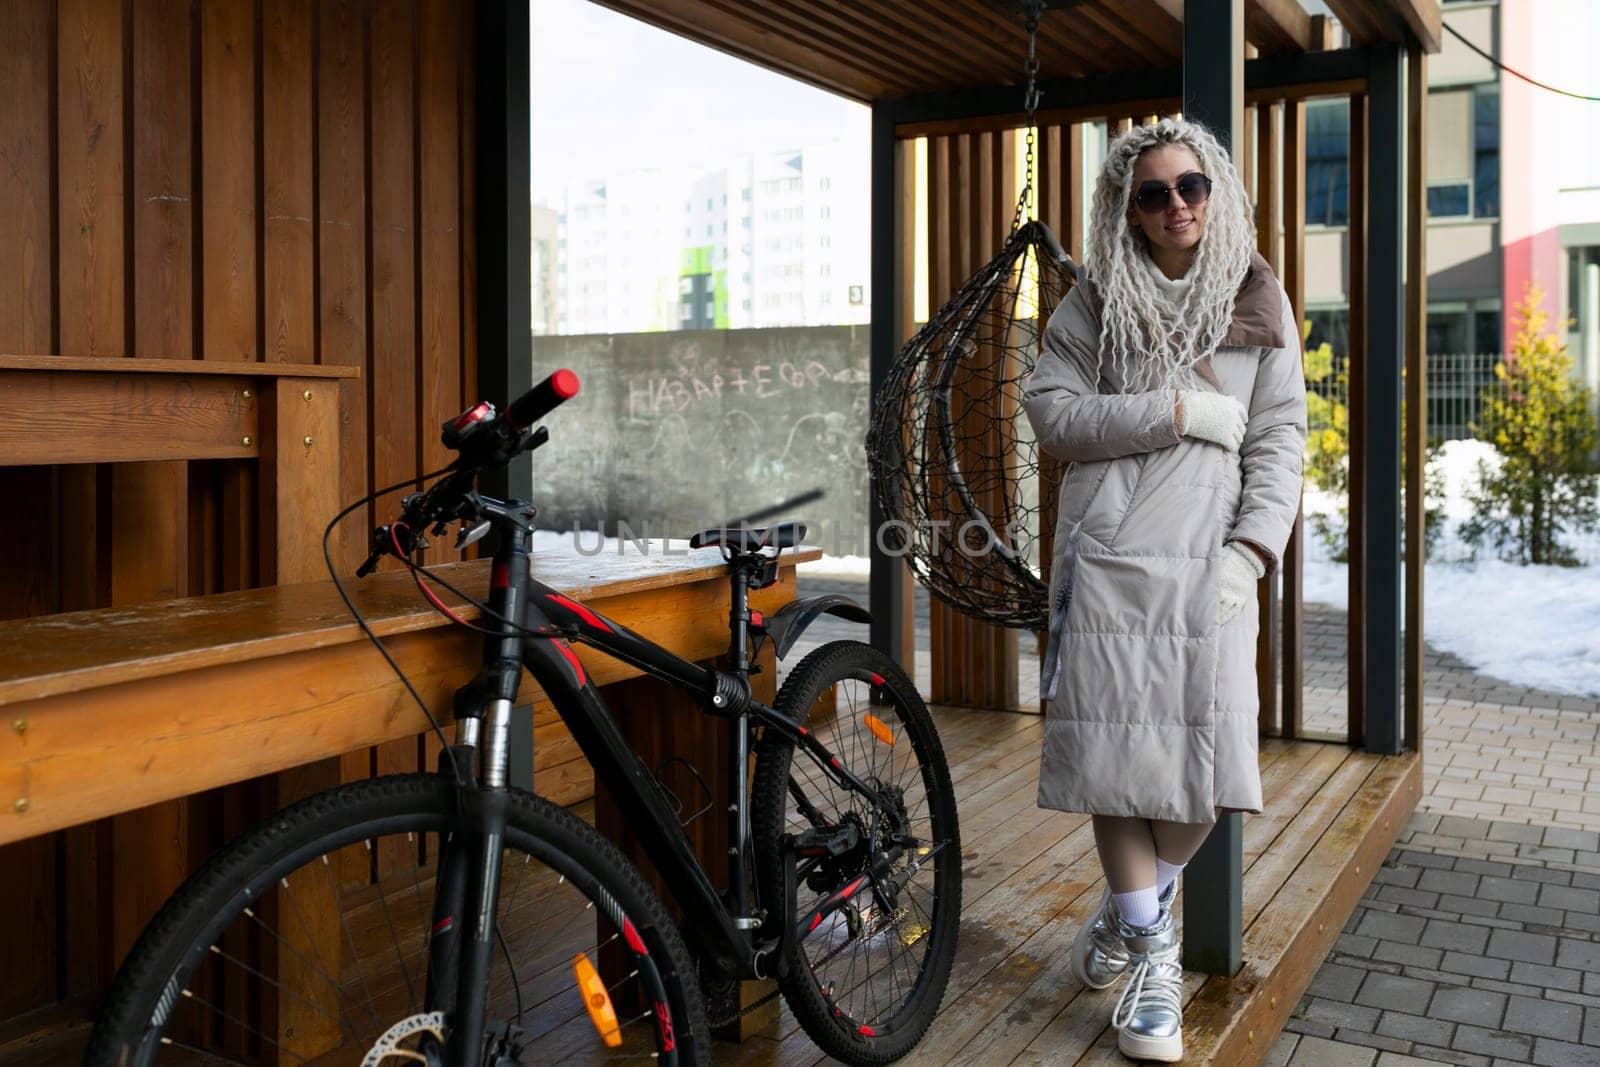 A woman is standing next to a bicycle on a porch. She is wearing casual clothing and appears to be looking out in the distance. The bike is leaning against the railing of the porch.